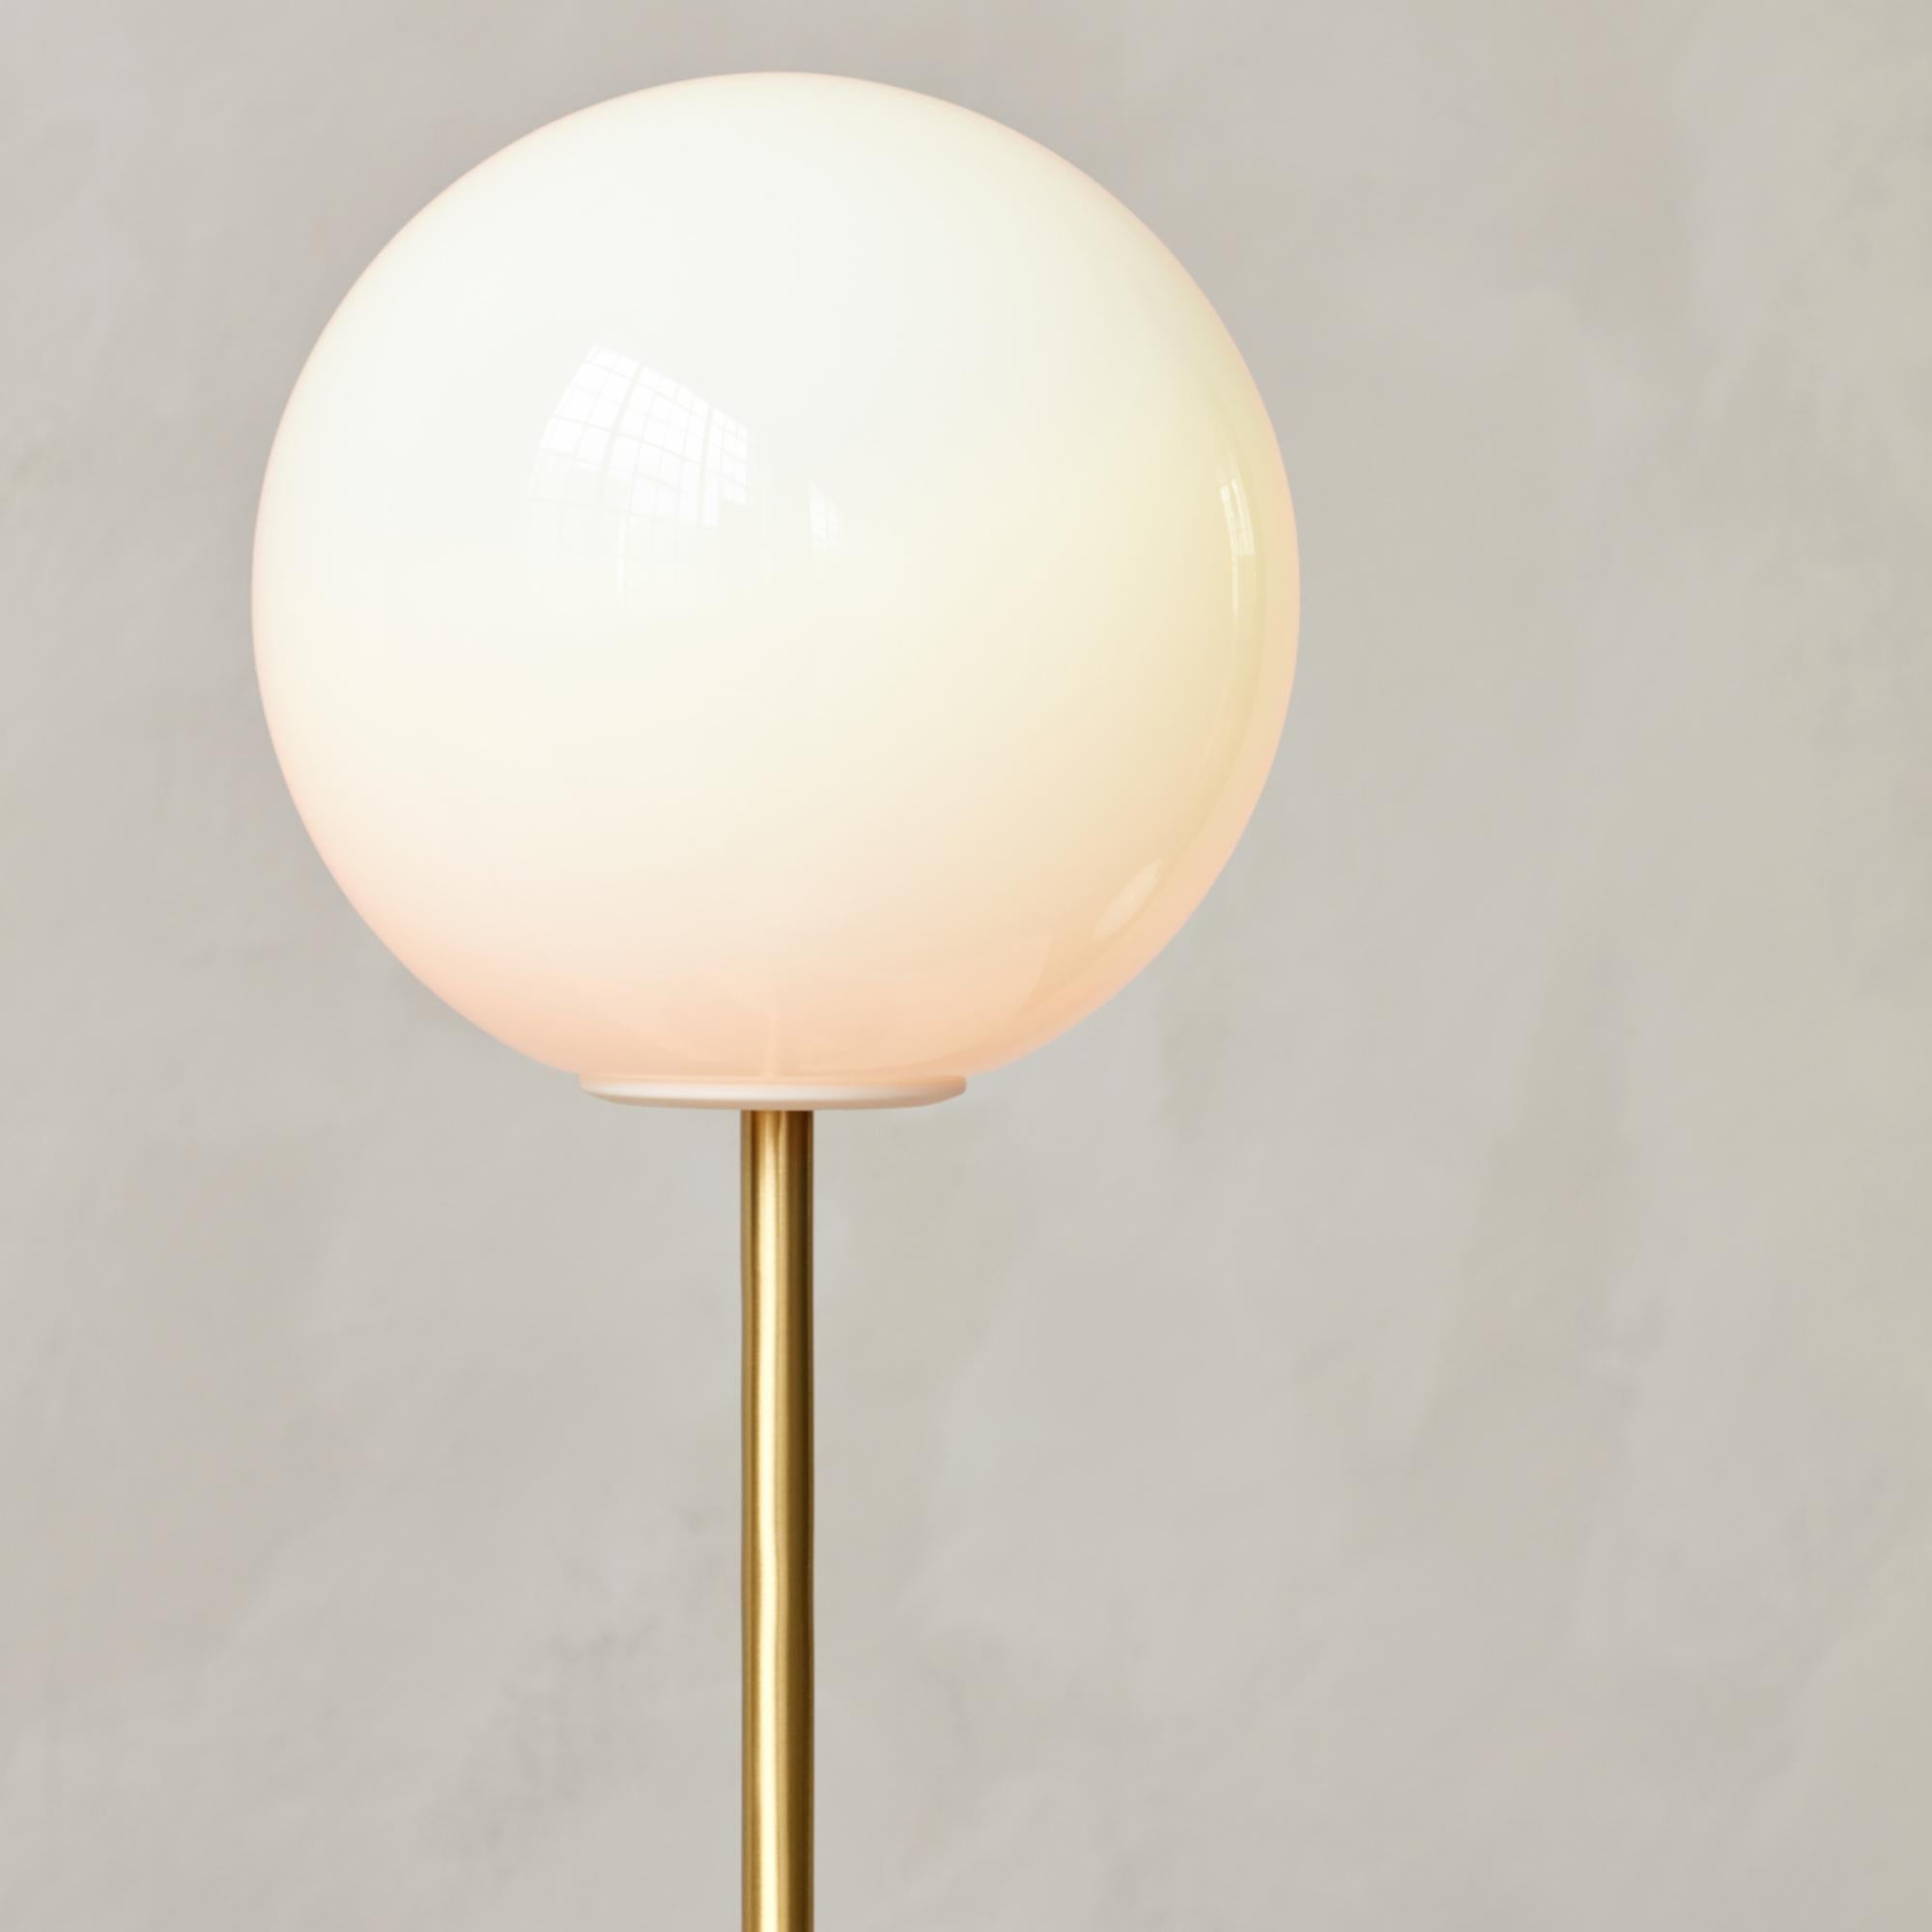 Chinese TR Bulb Table Lamp with a Brushed Brass Base and a Matte Opal Bulb, Dim-to-Warm For Sale